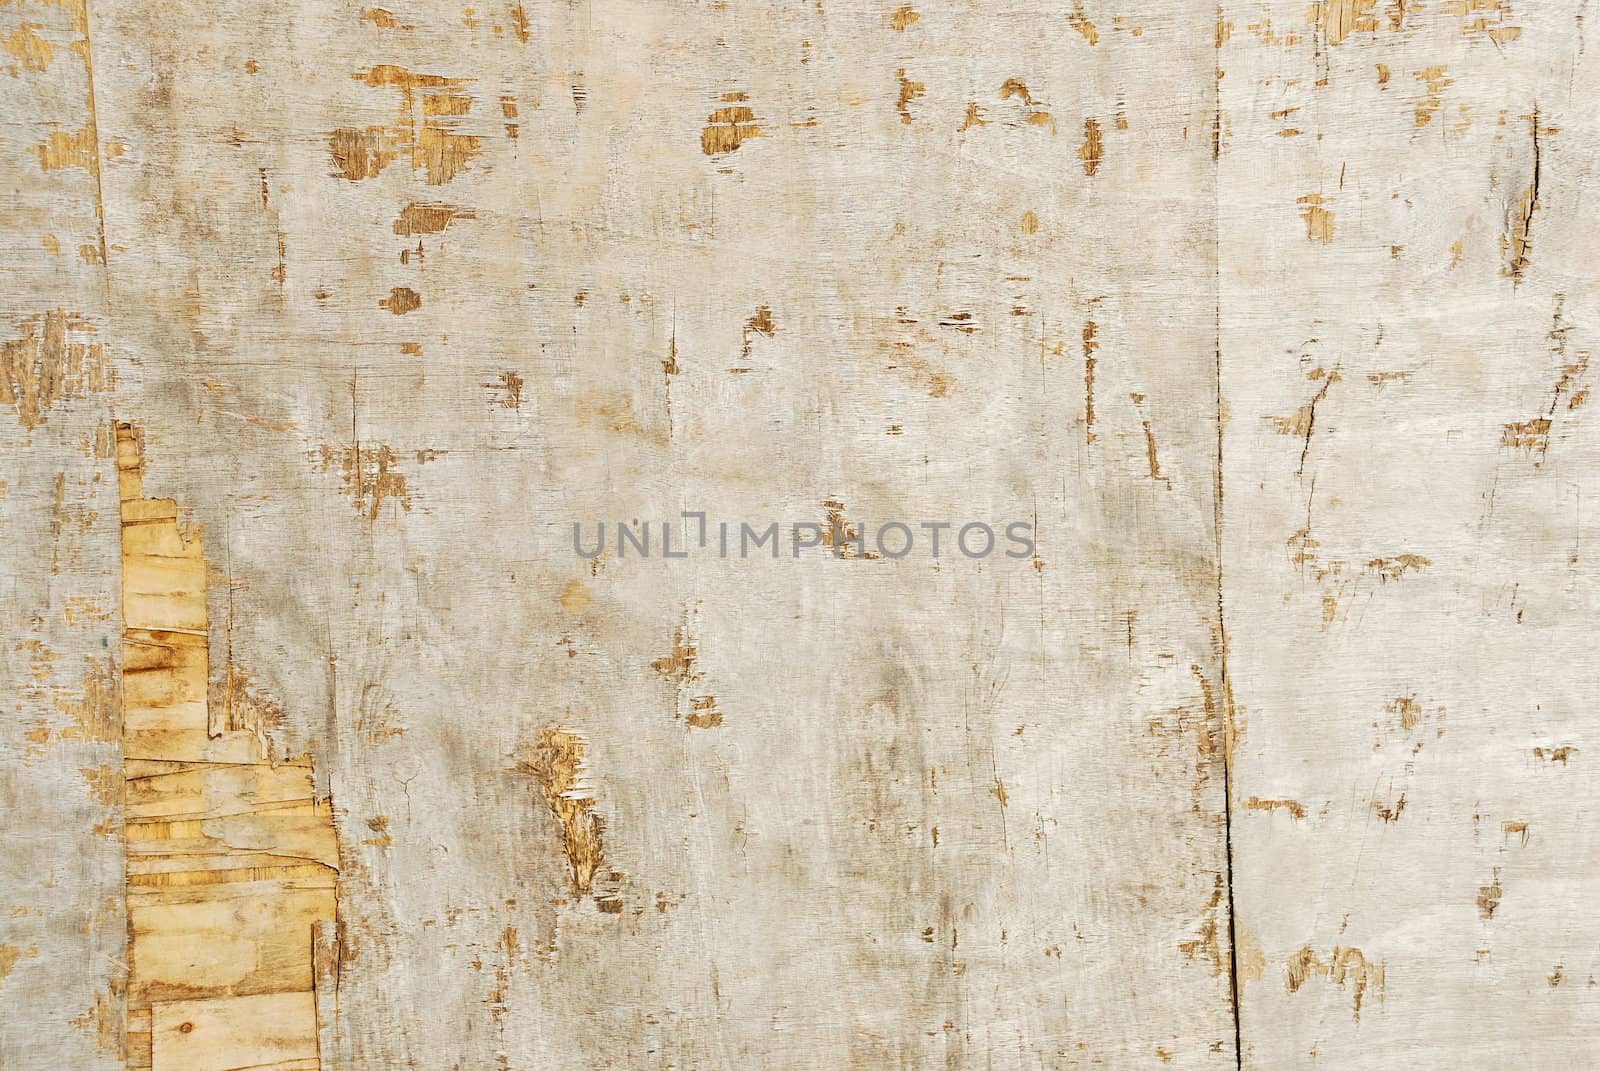 Wood plank brown and green texture background vintage by teen00000